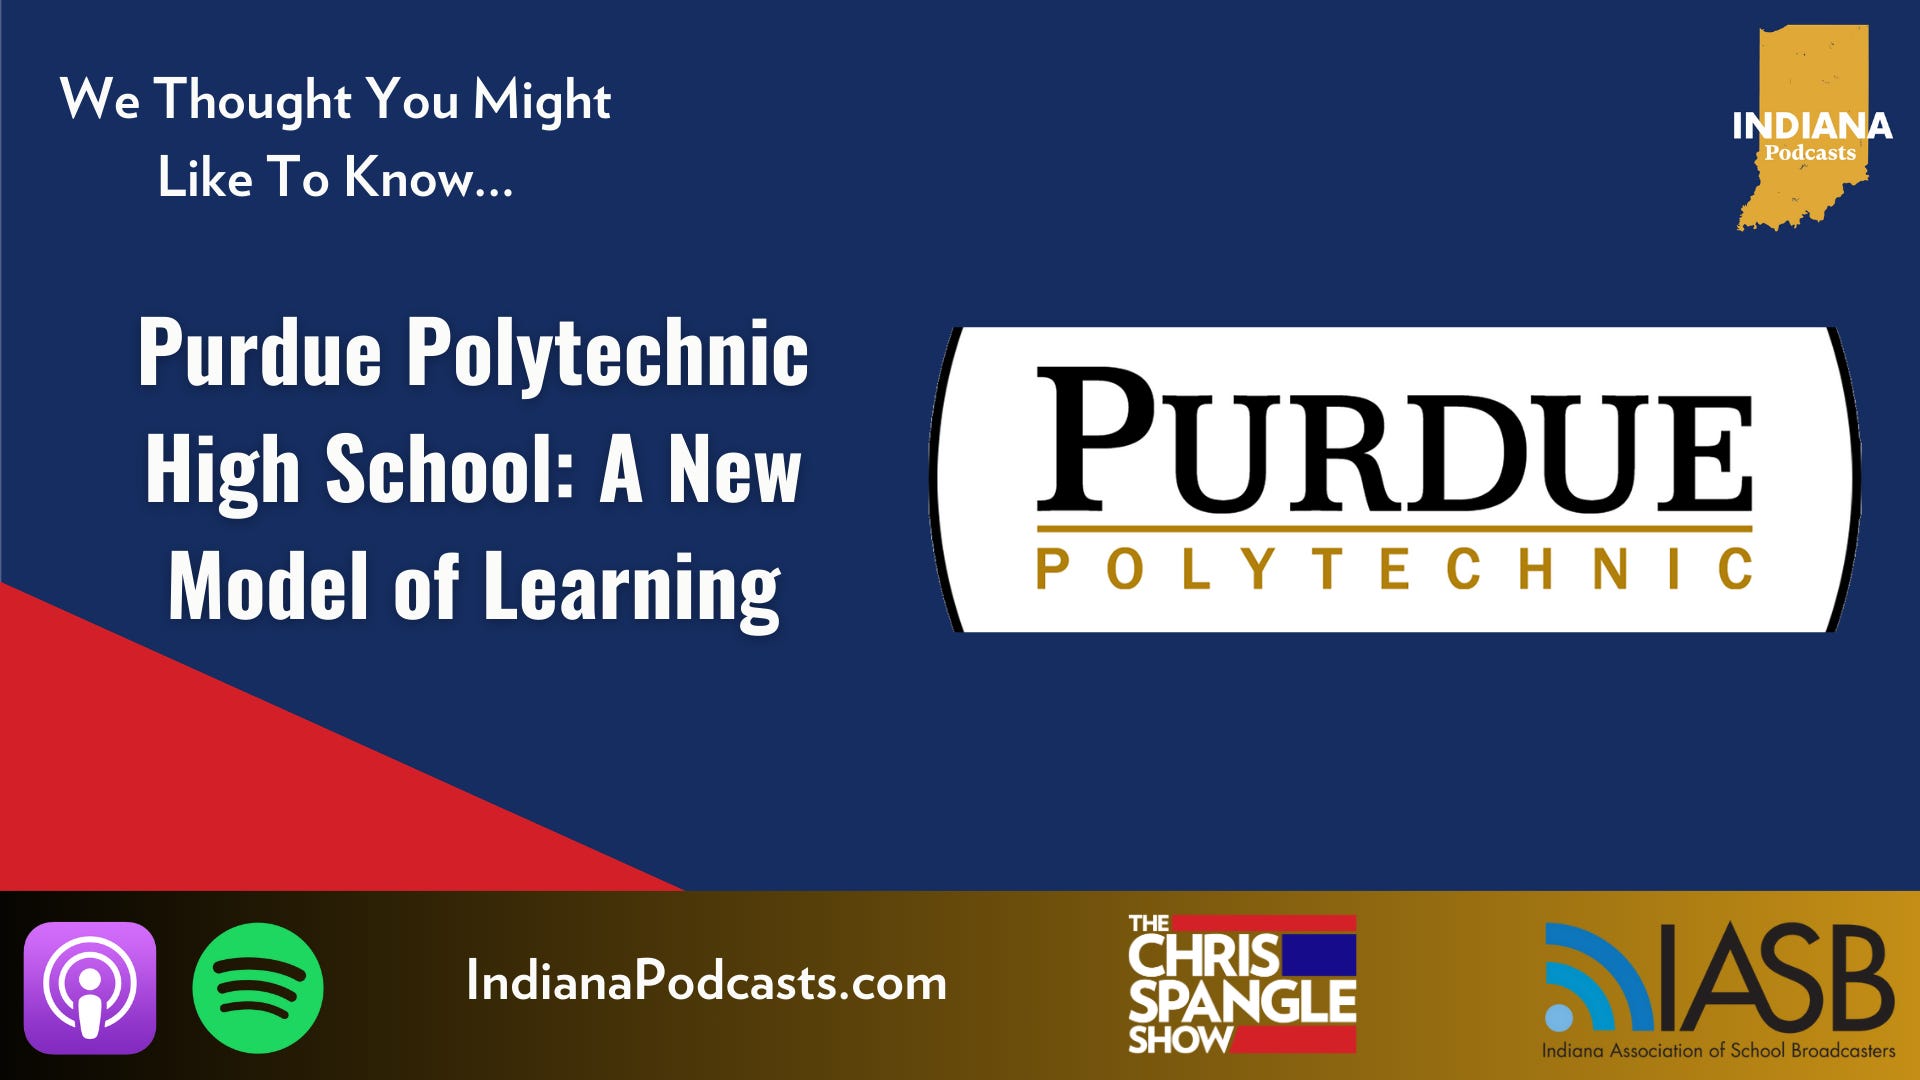 Purdue Polytechnic High School: A New Model of Learning